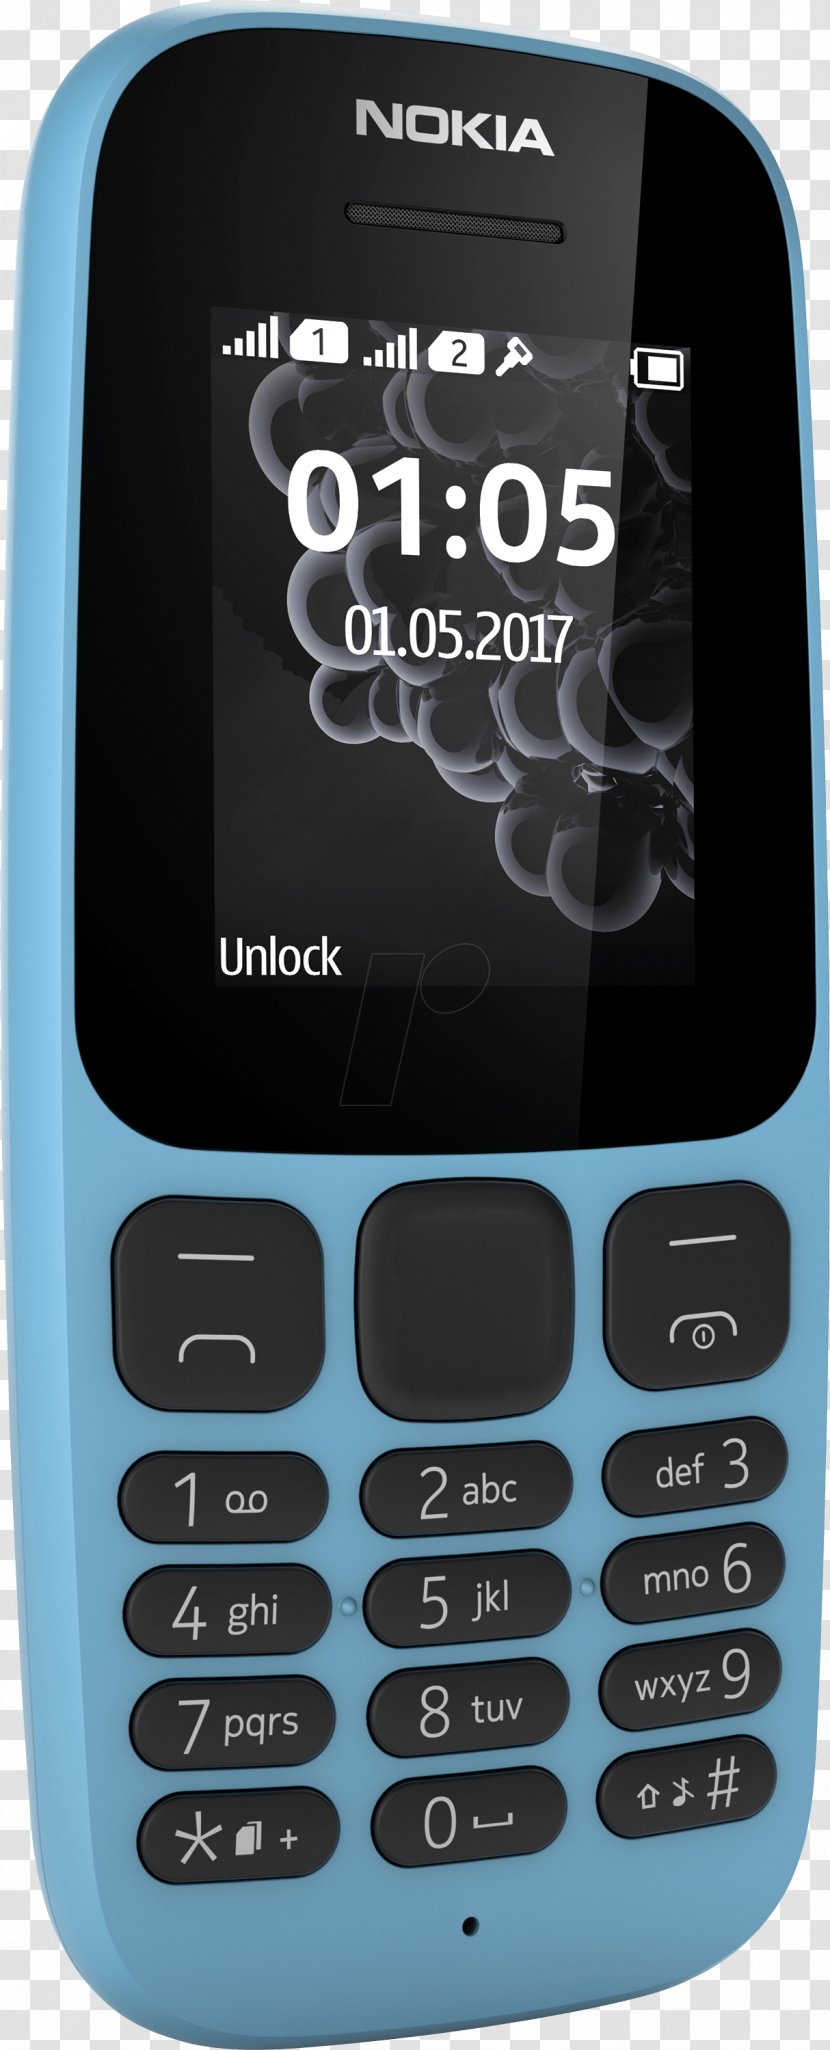 Nokia 105 6 Feature Phone 諾基亞 - Answering Machine - Smartphone Transparent PNG